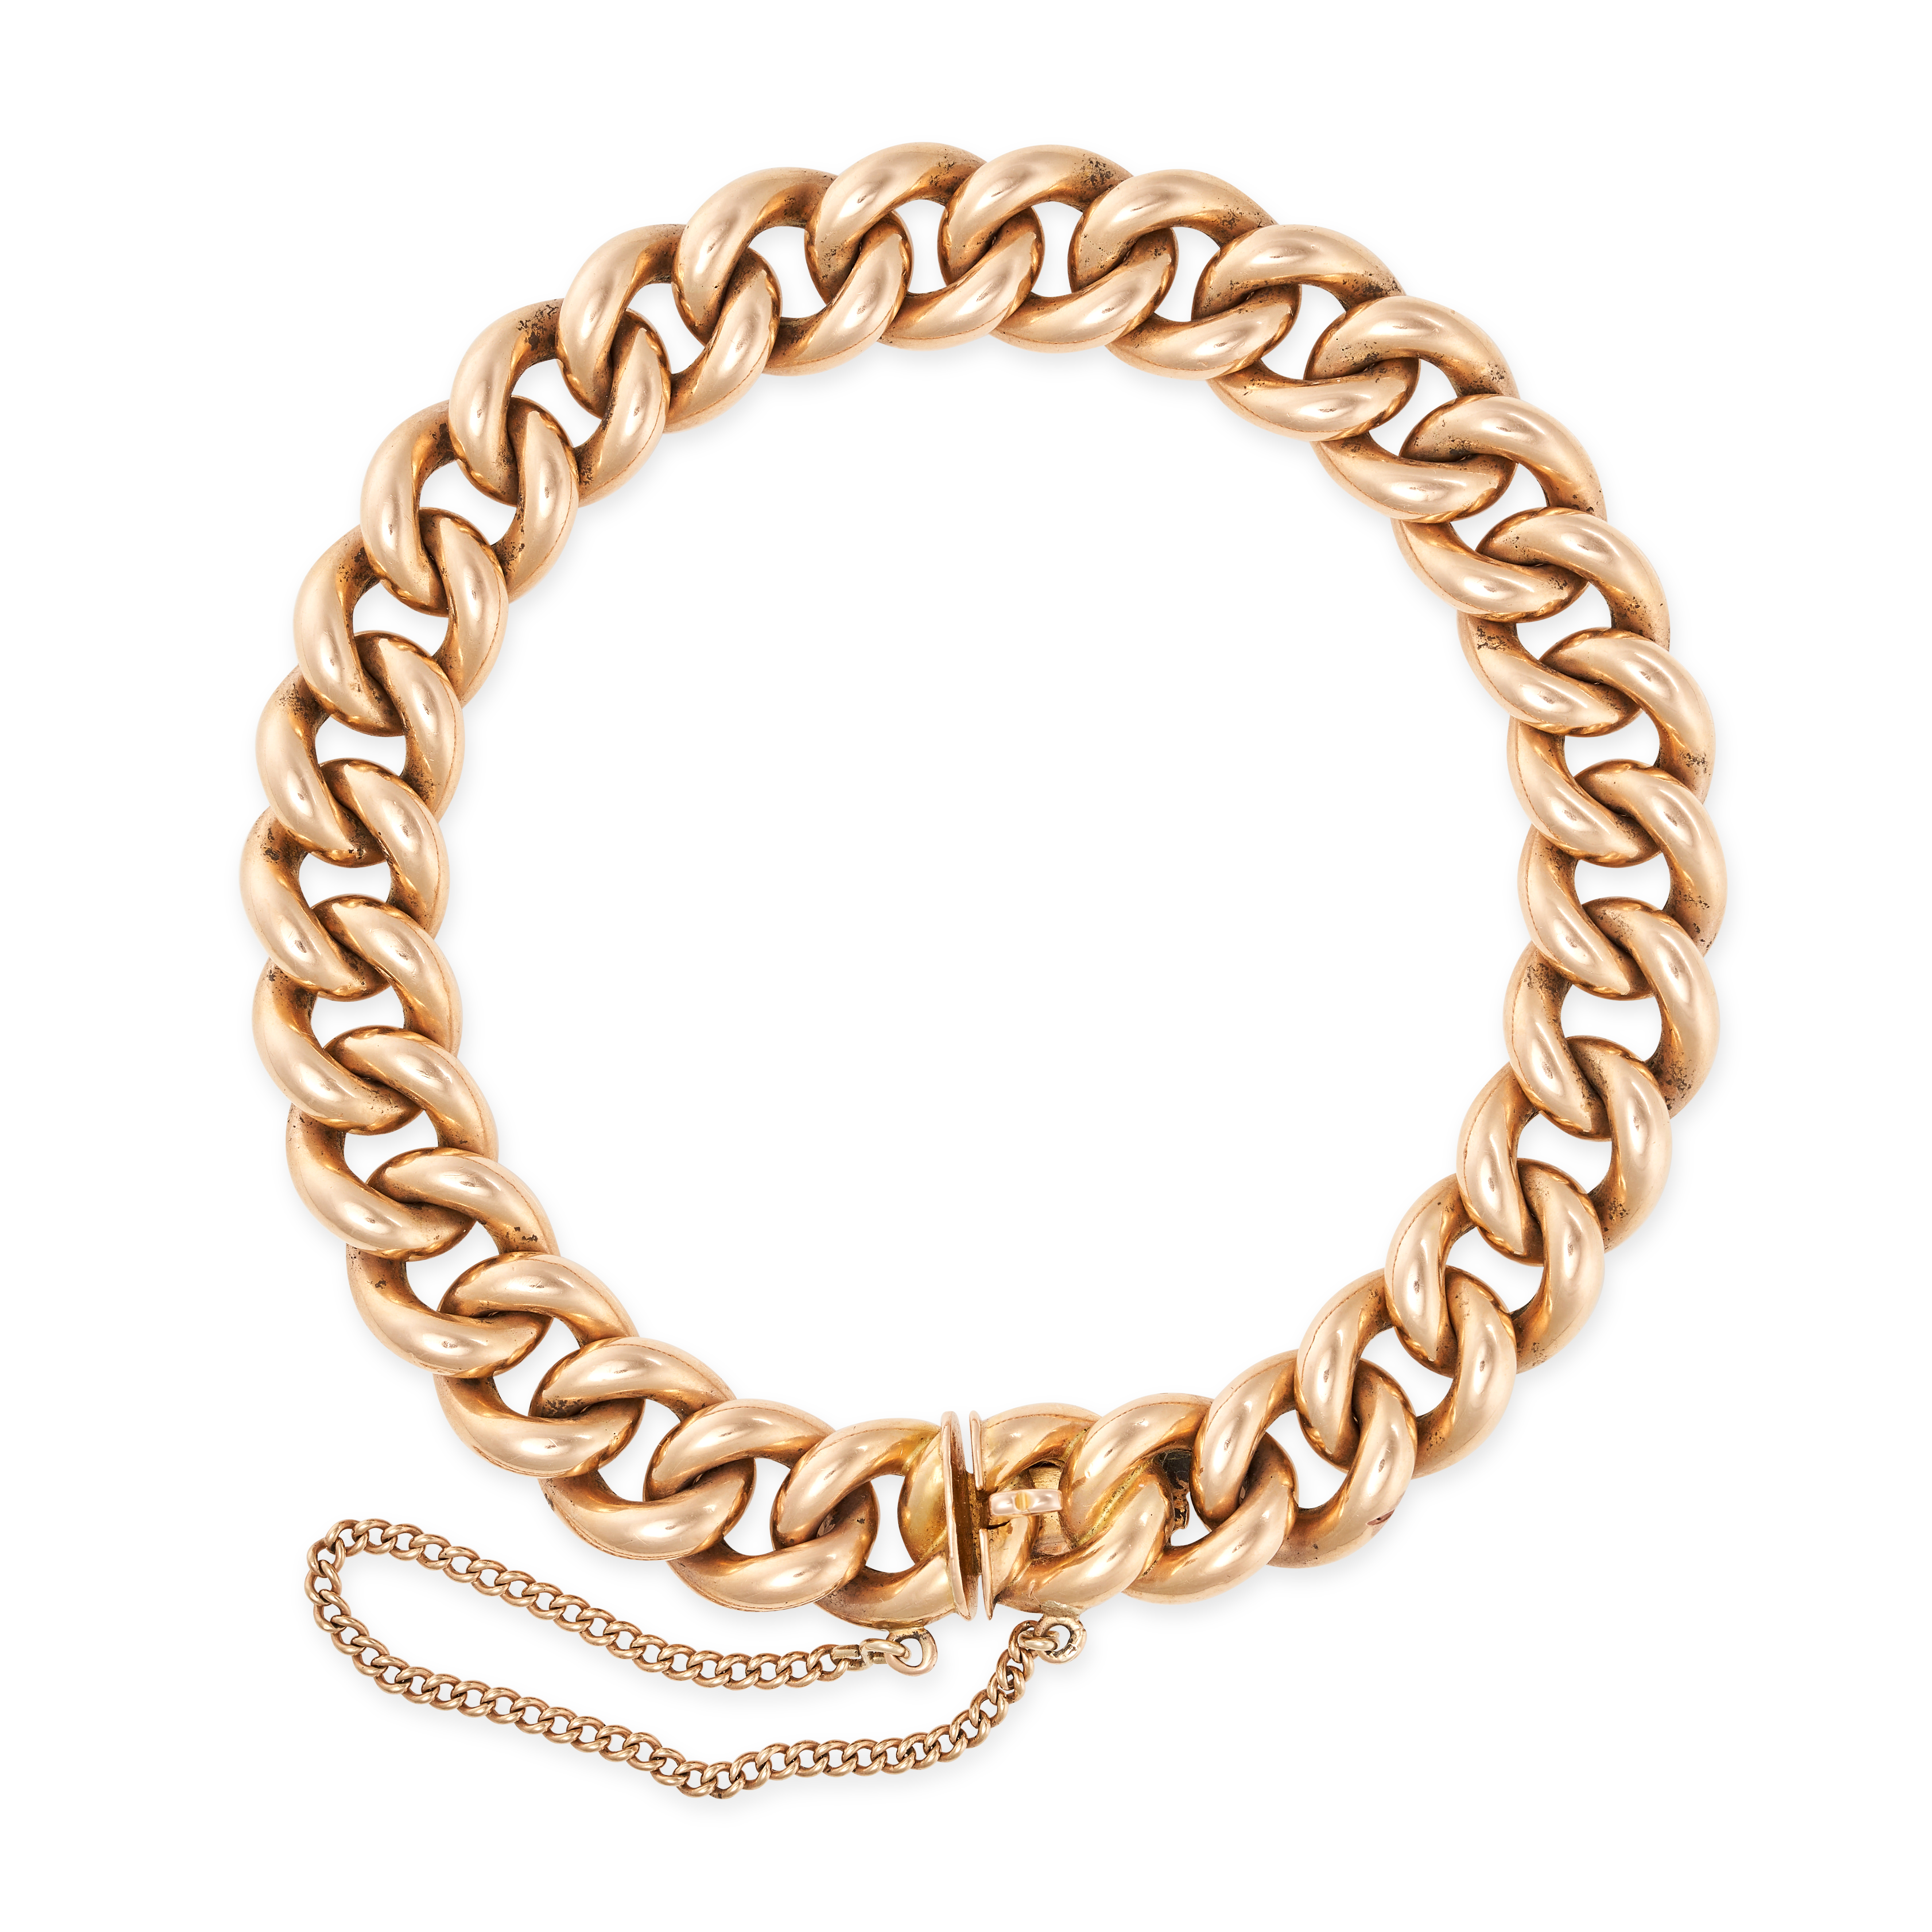 AN ANTIQUE CURB LINK BRACELET in yellow gold, comprising a row of curb links, marked indistinctly...